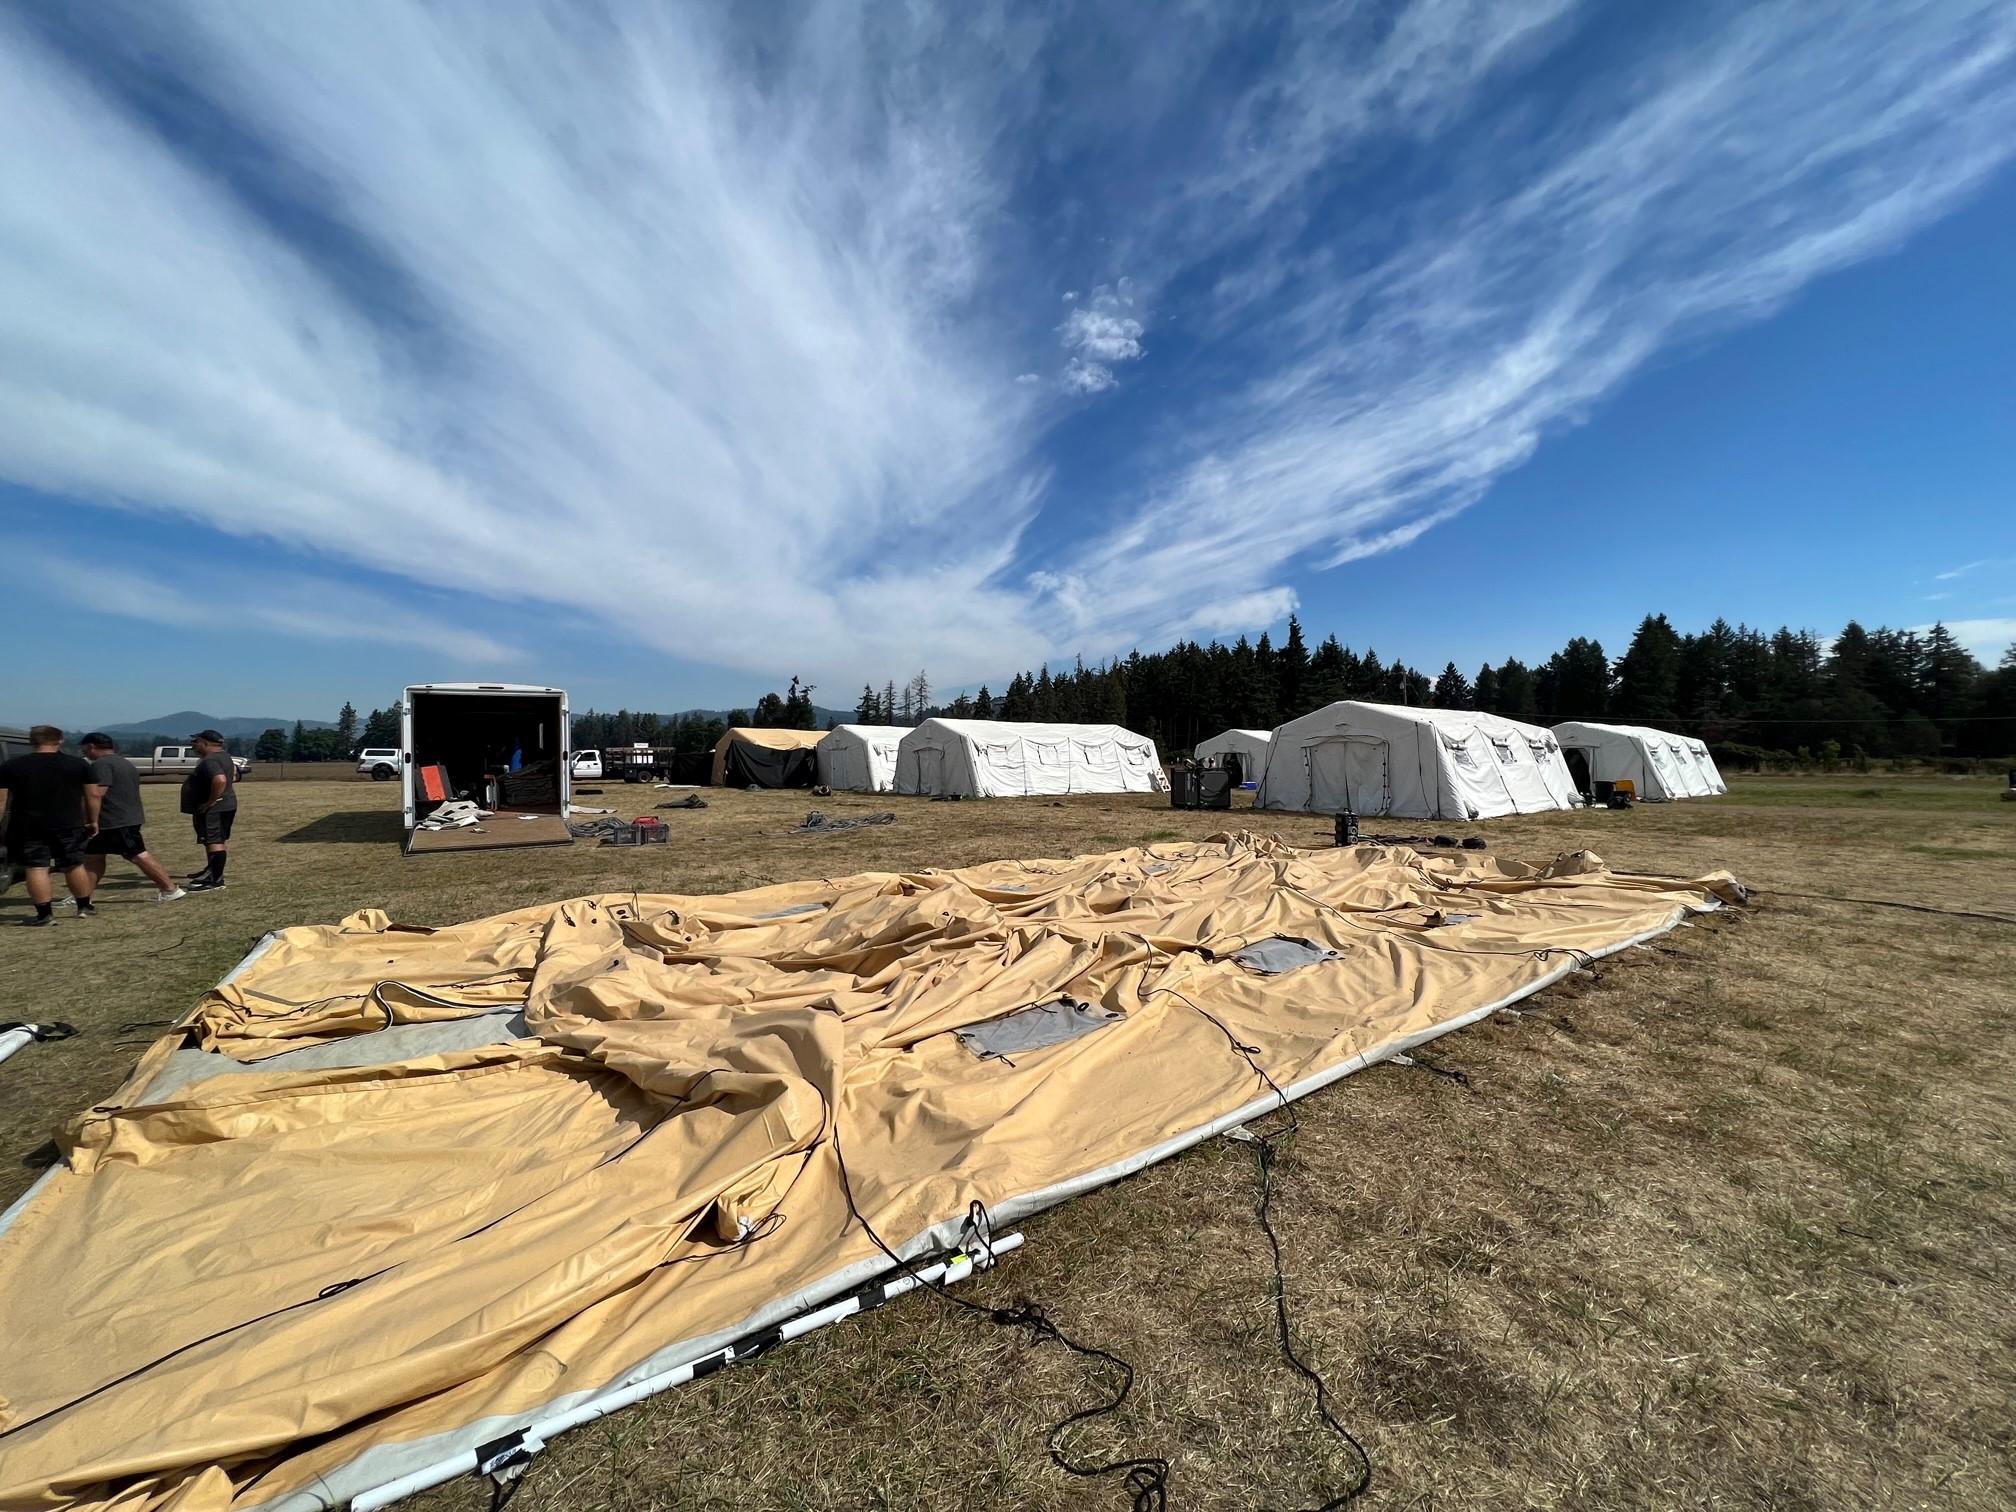 This is an image of a yurt being assembled at the Incident Command Post